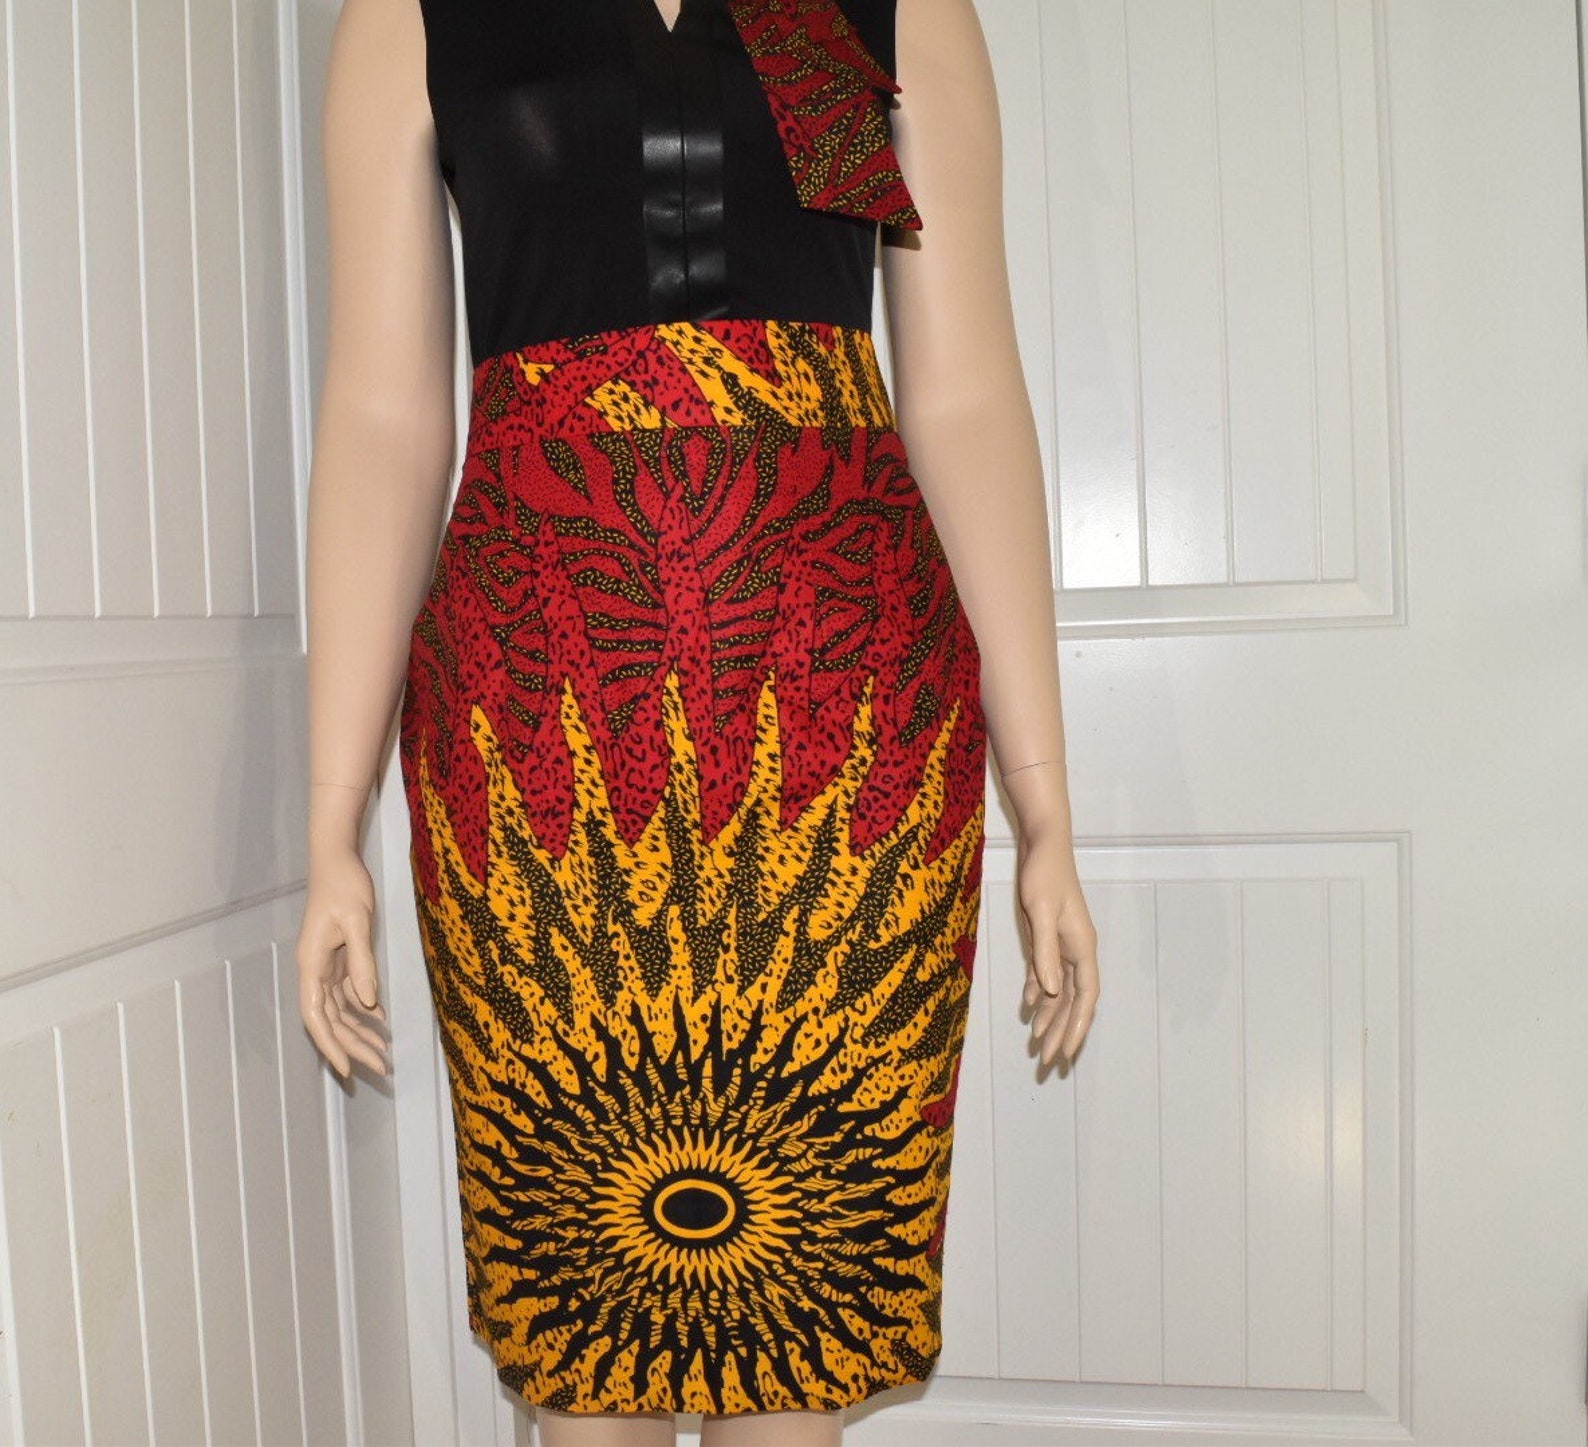 African Pencil Skirt/ African Women Clothing for Work/ African | Etsy